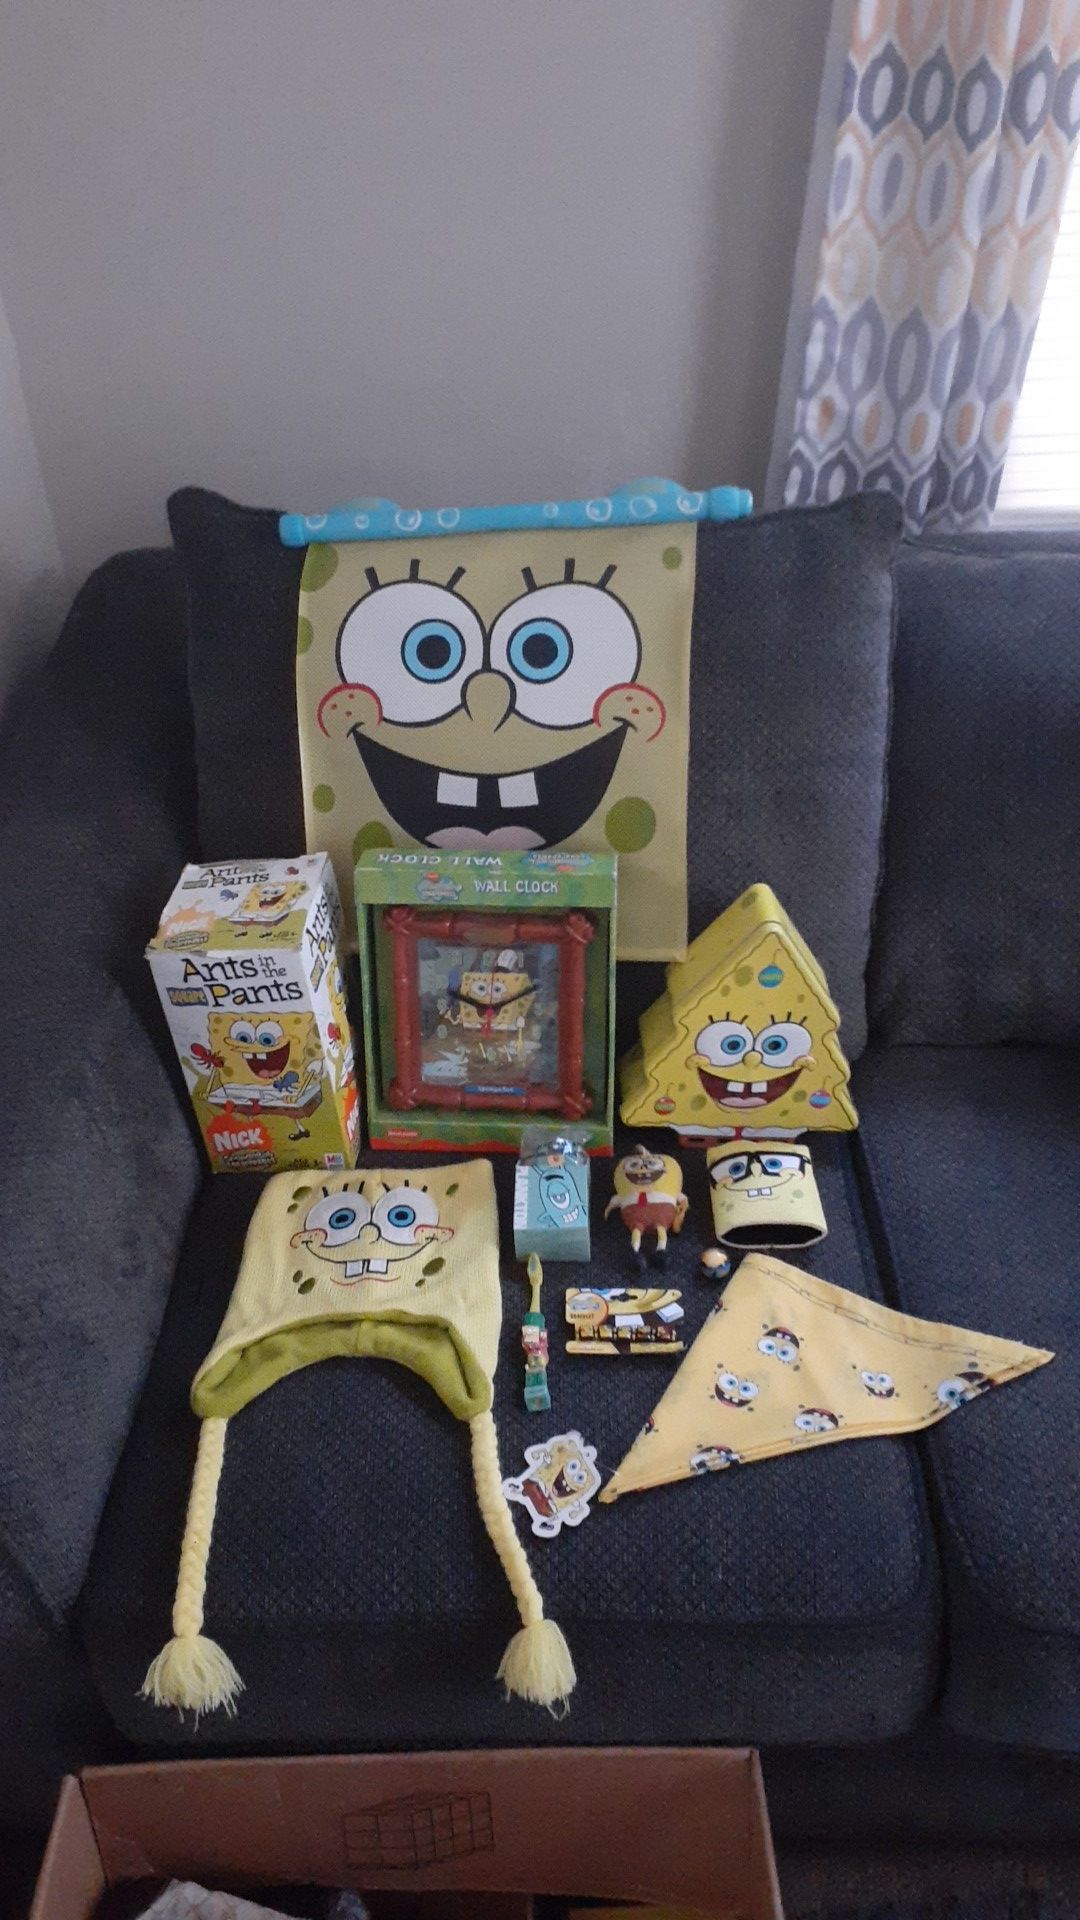 Kids spongebob SquarePants toy lot all 12 items for one price shipping available